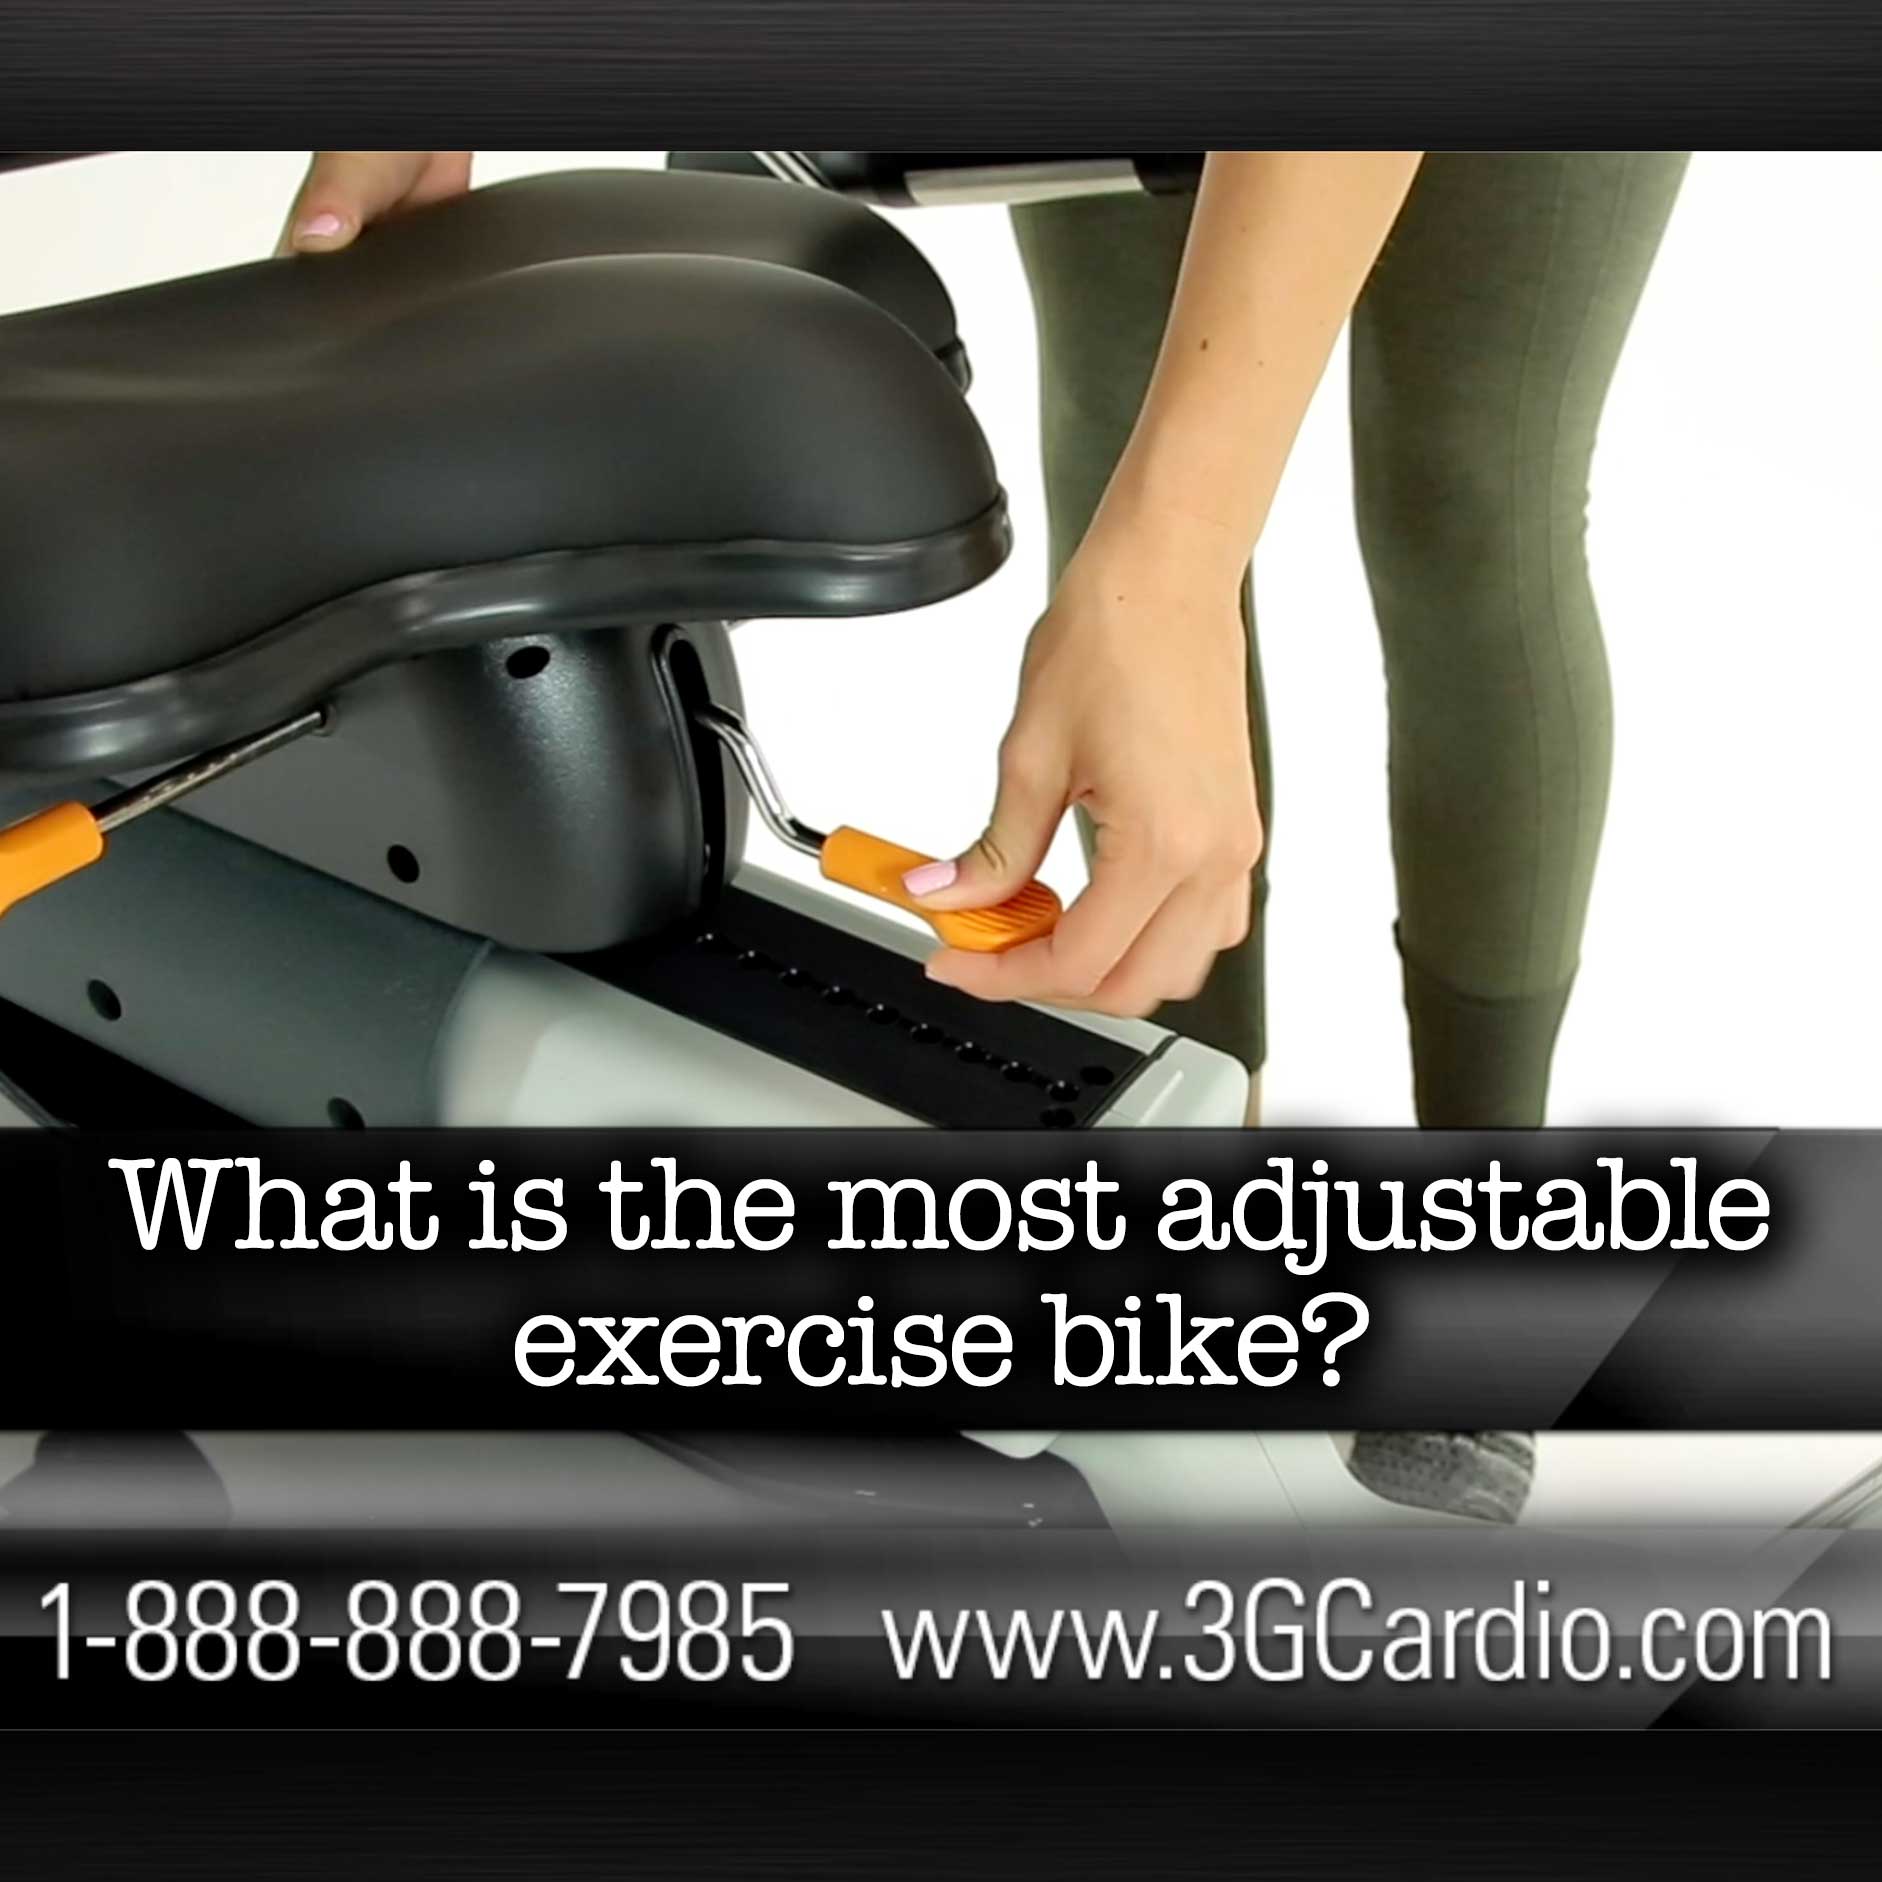 What is the most adjustable exercise bike?